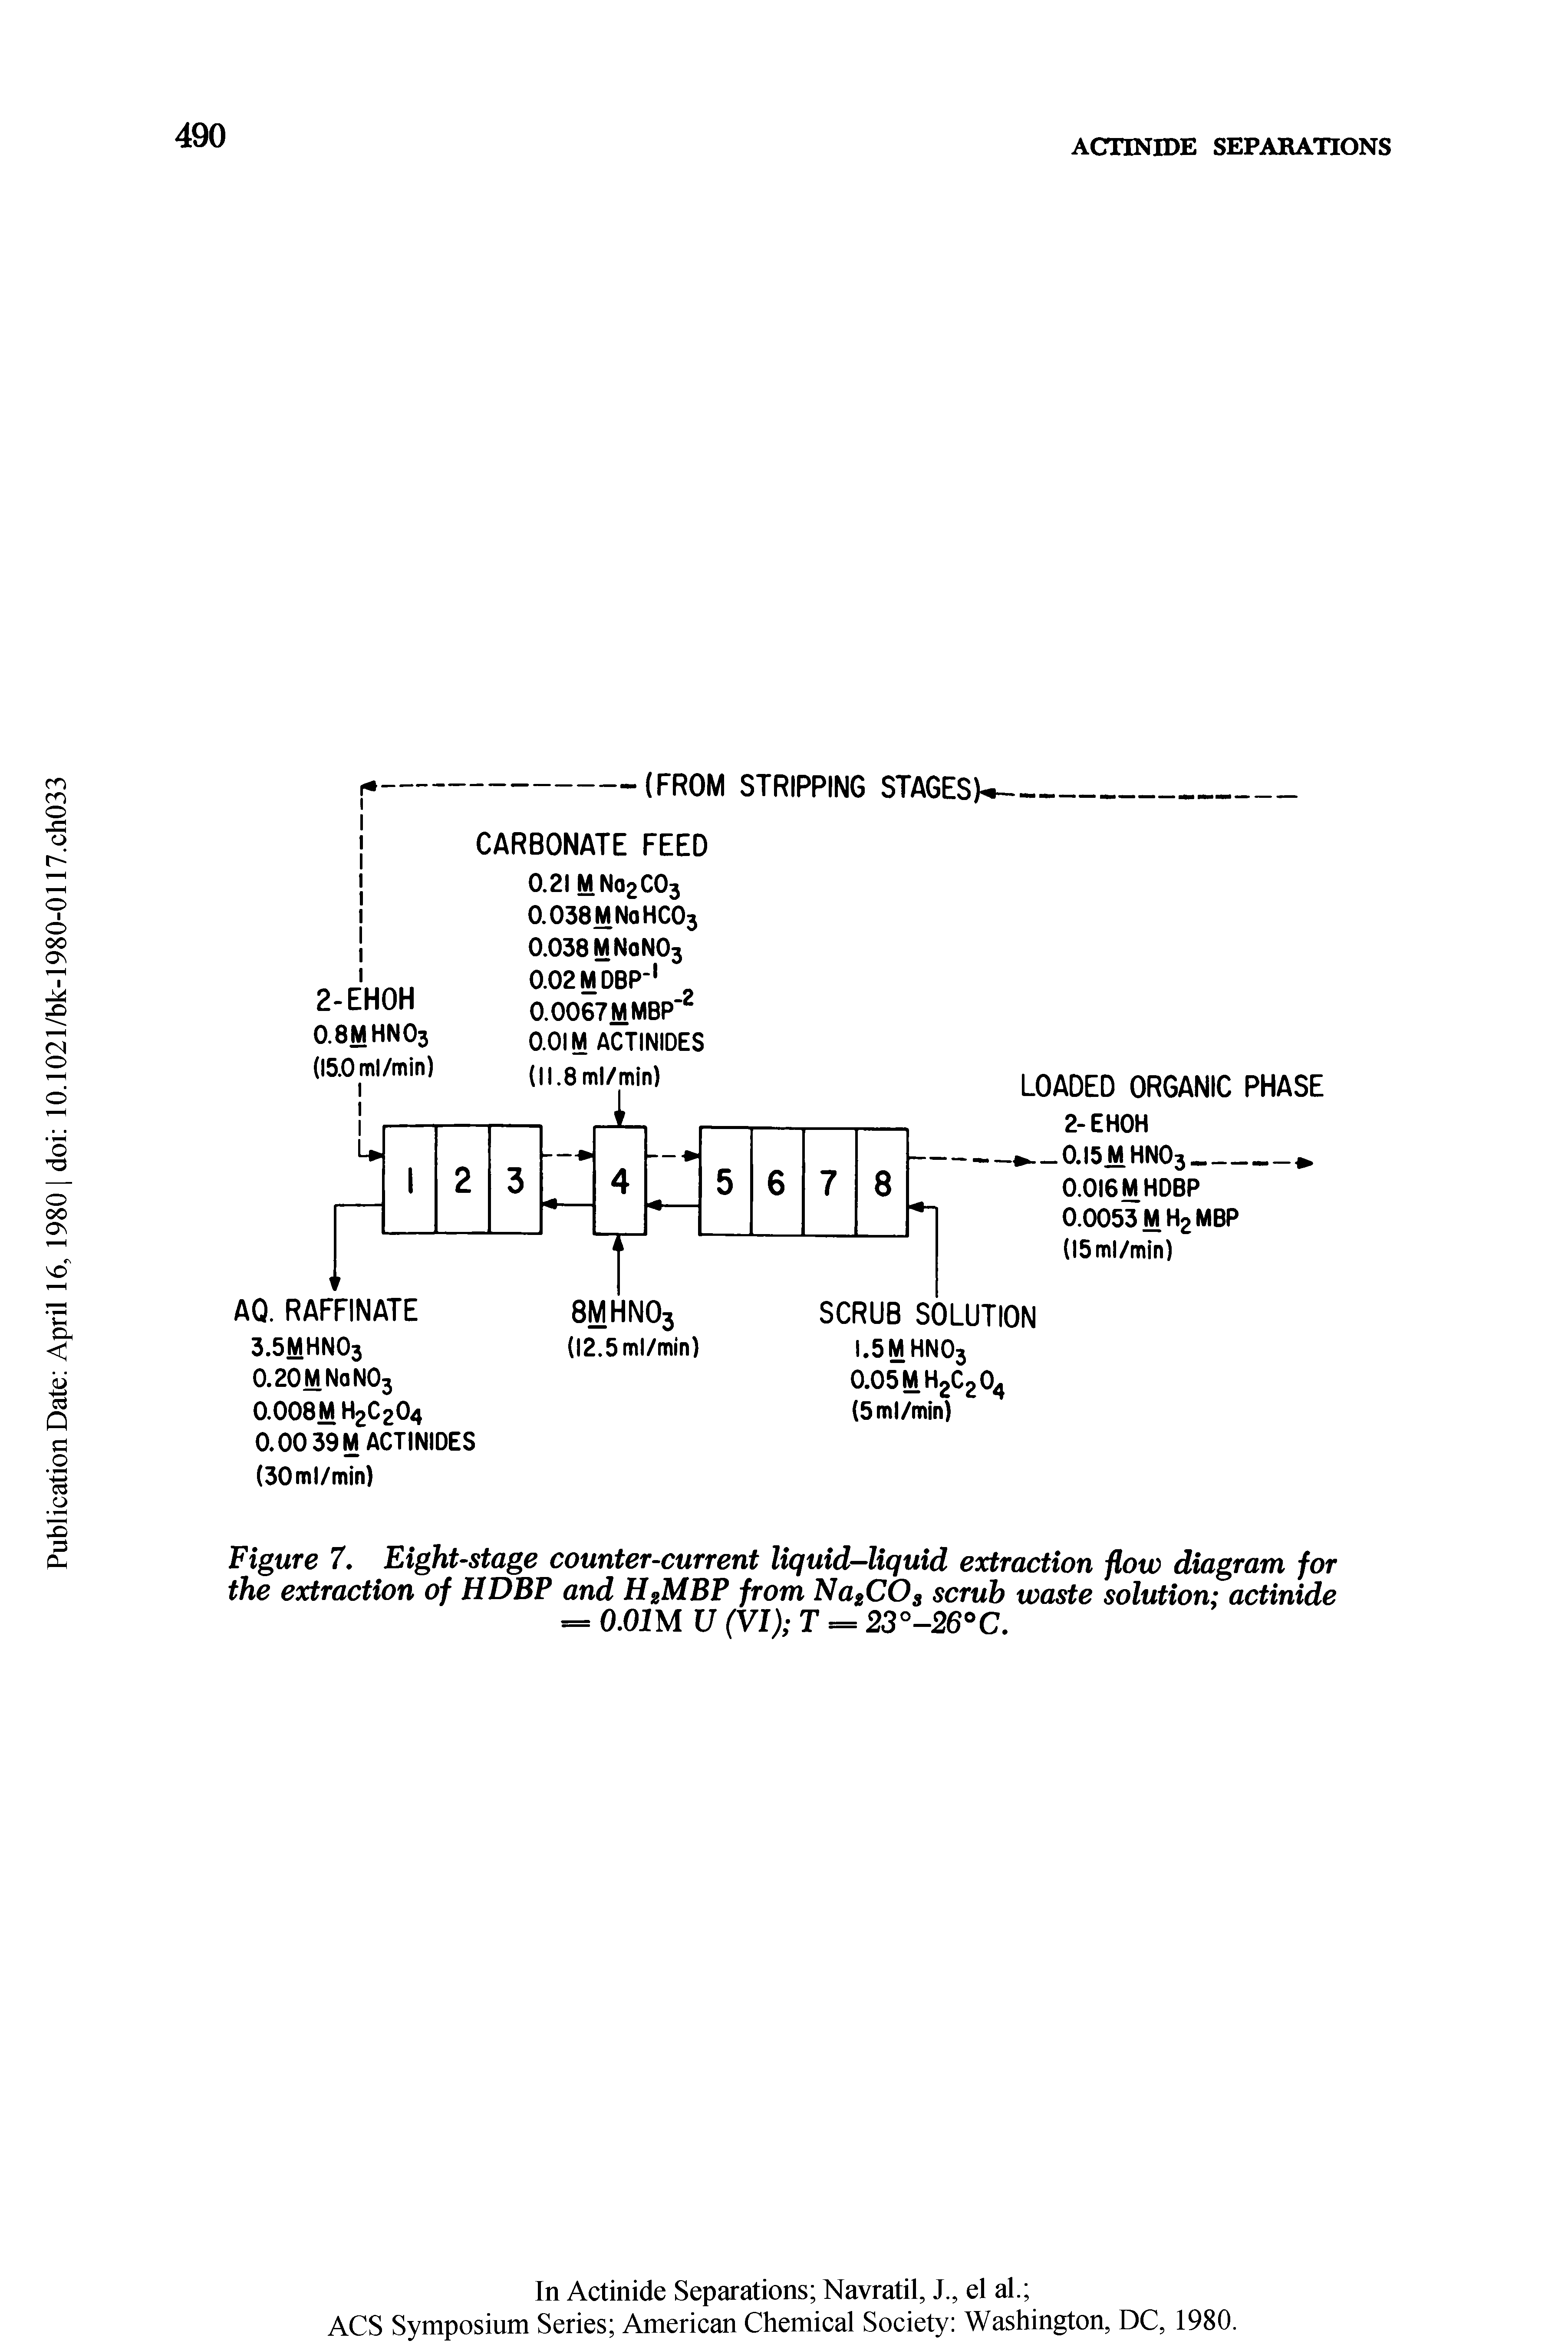 Figure 7. Eight-stage counter-current liquid—liquid extraction flow diagram for the extraction of HDBP and H2MBP from NagCOs scrub waste solution actinide = 0.01 M U (VI) T = 23°-26°C.